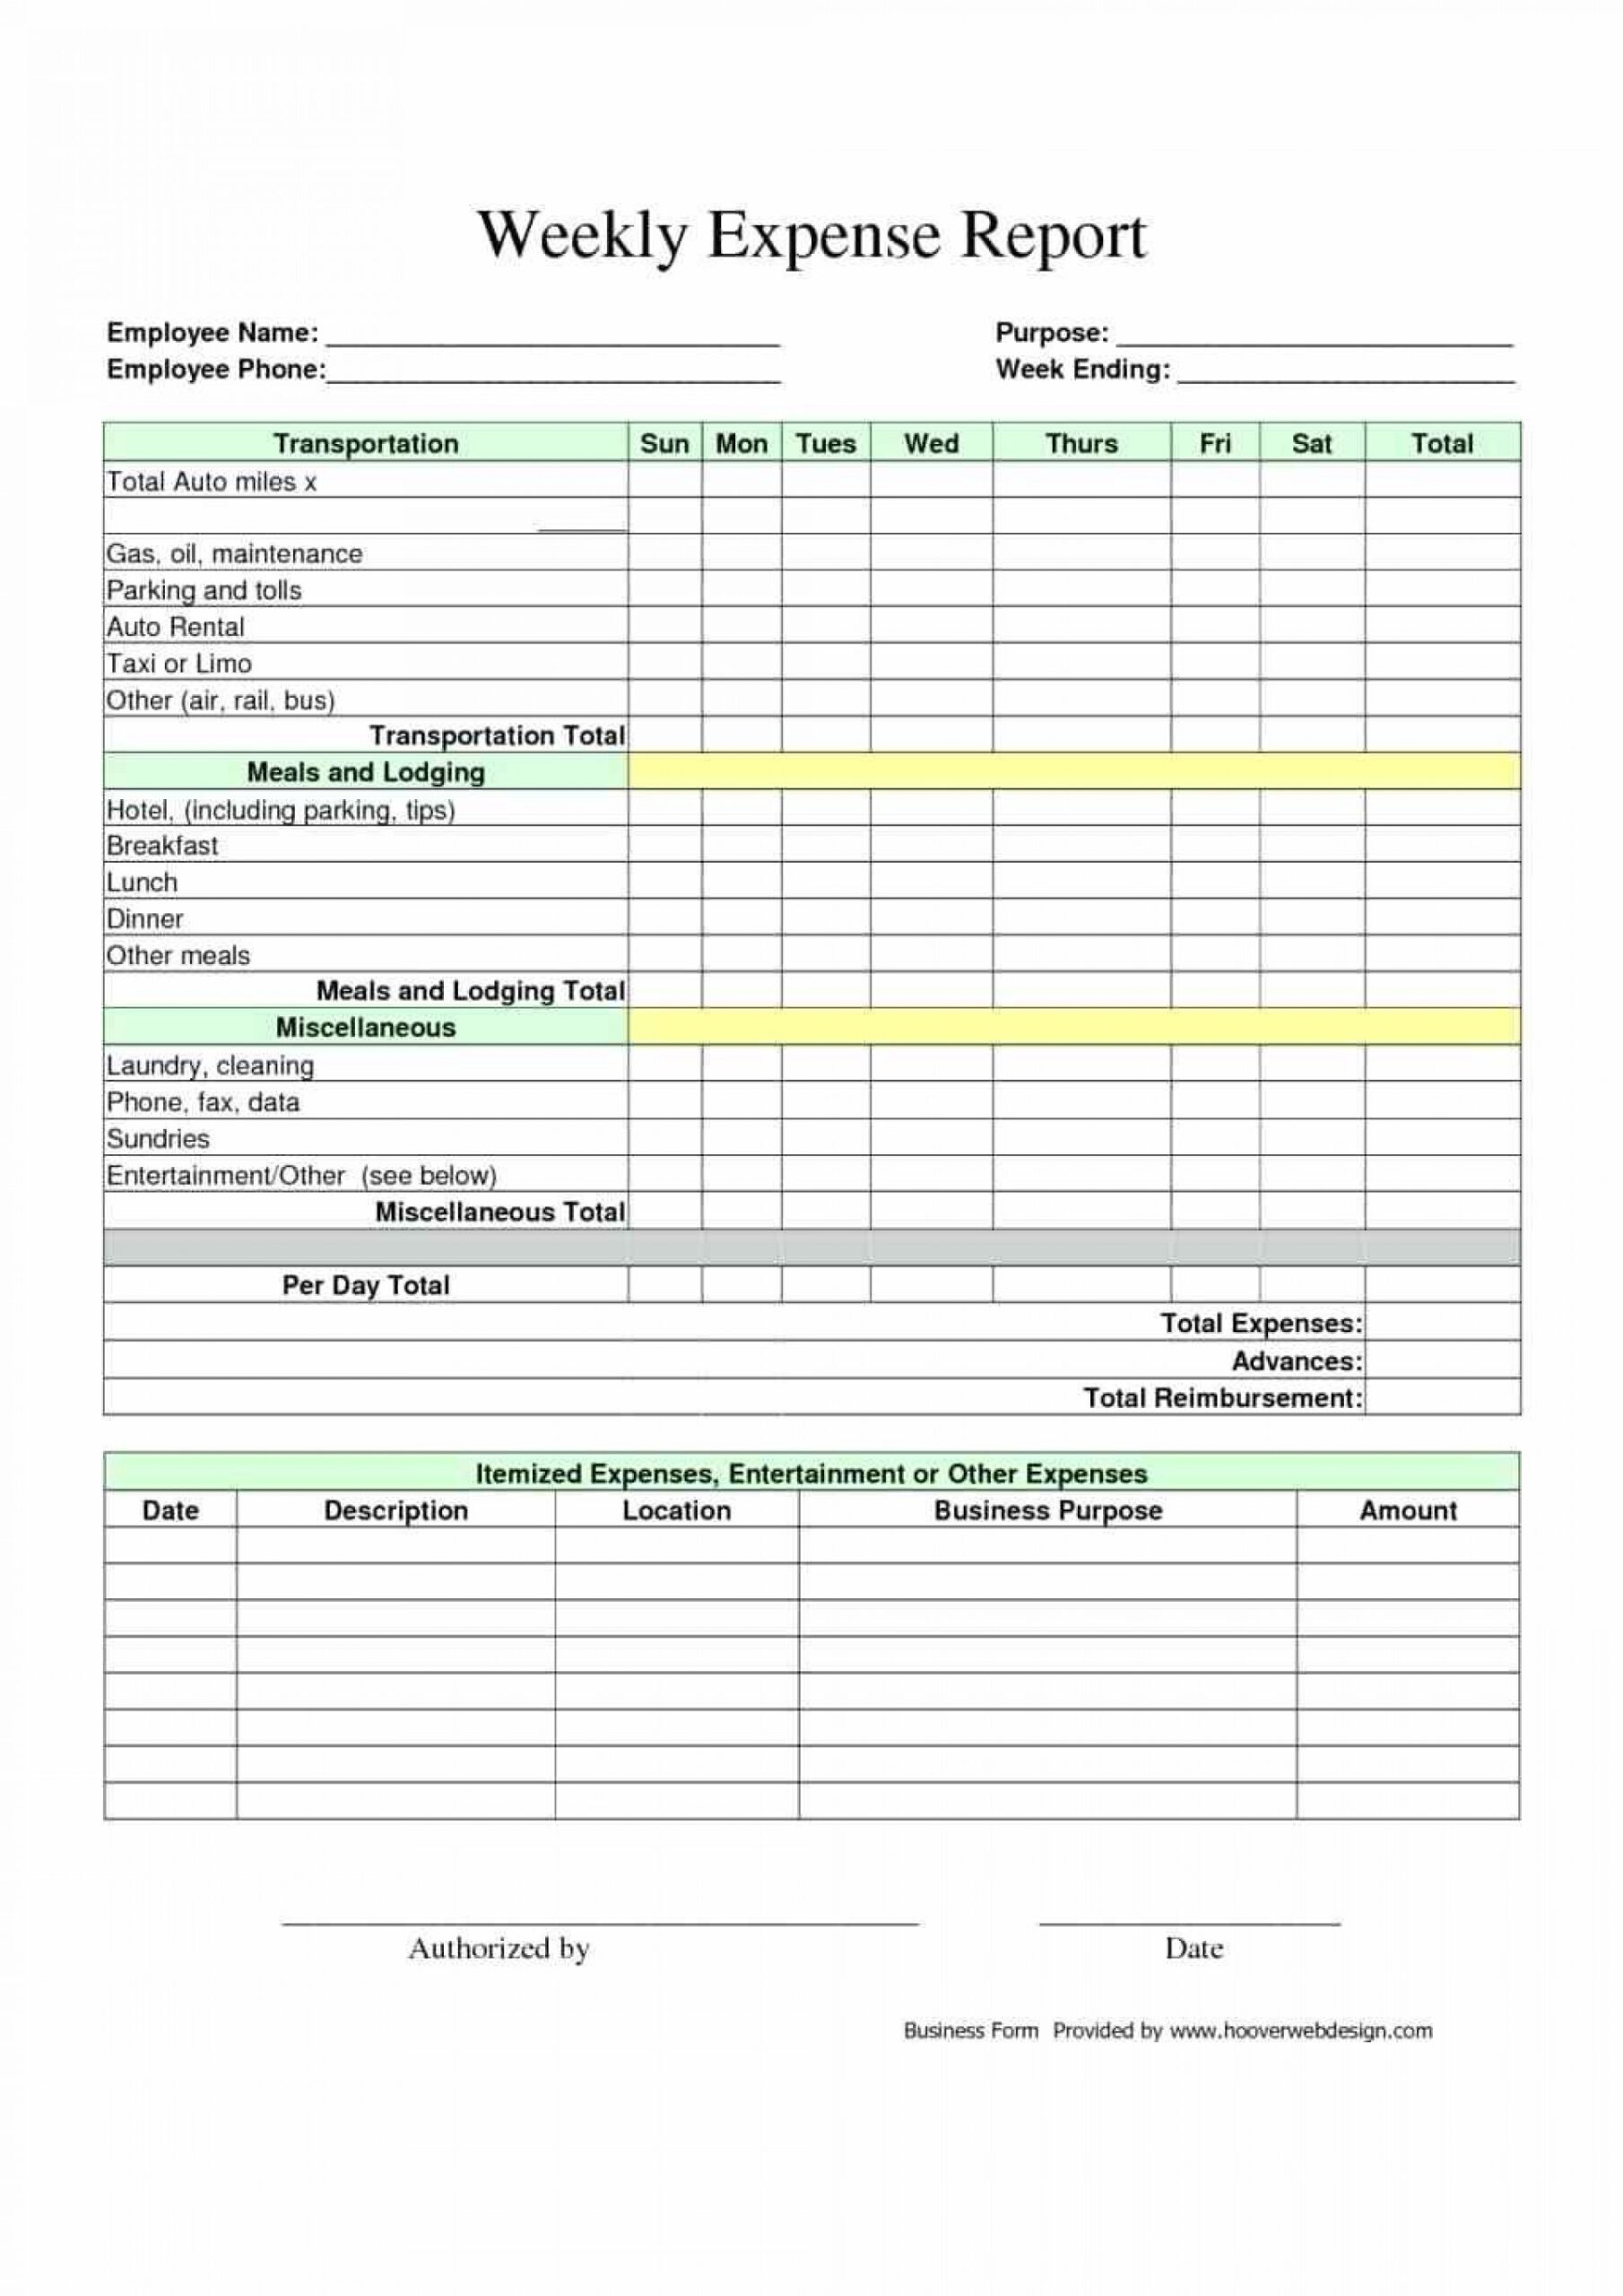 024 How To Account For Employee Expenses Free Expense Report Inside Gas Mileage Expense Report Template